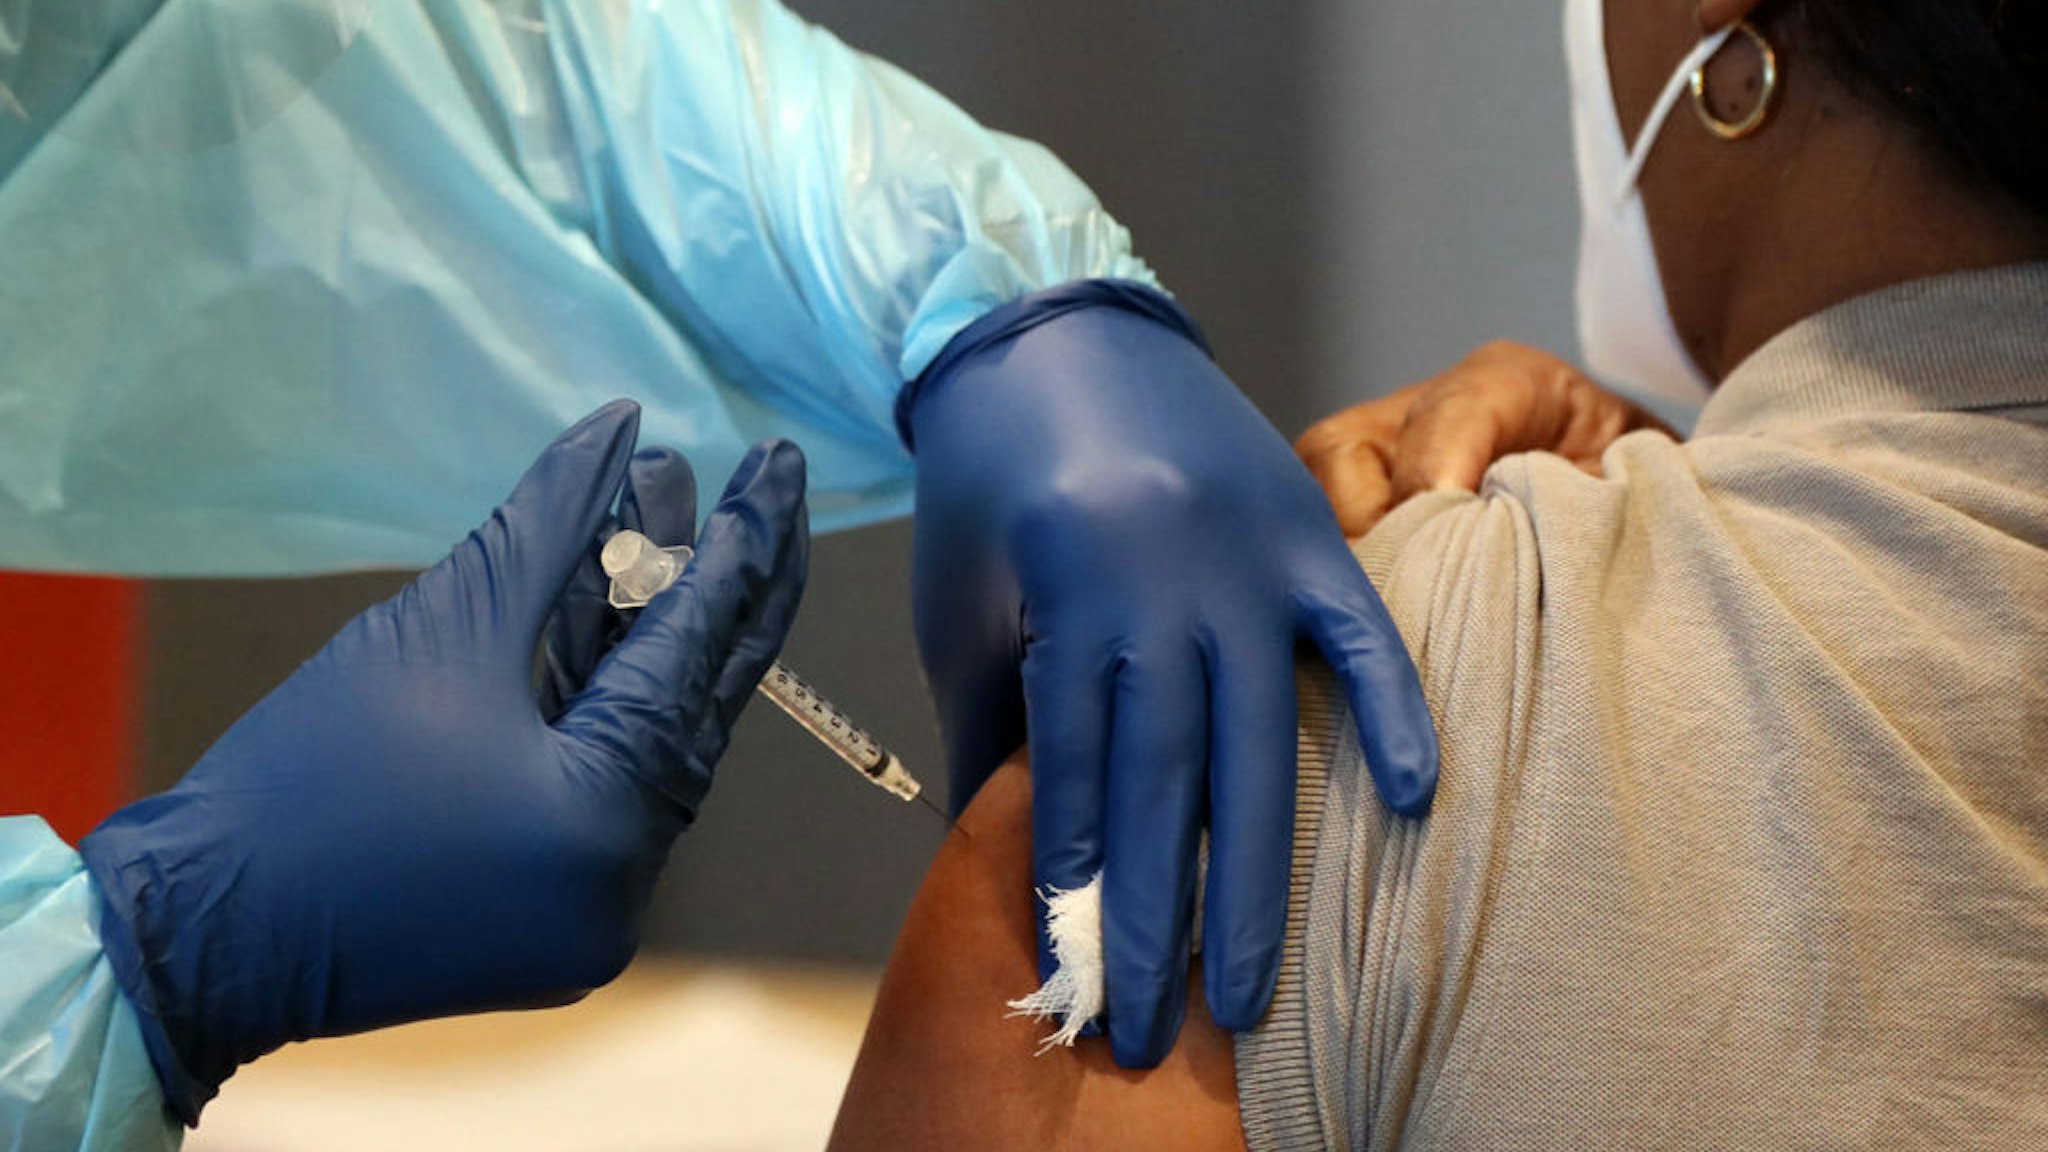 A woman receives the COVID-19 vaccine in this file photo. (Amy Beth Bennett/Sun Sentinel/Tribune News Service via Getty Images)